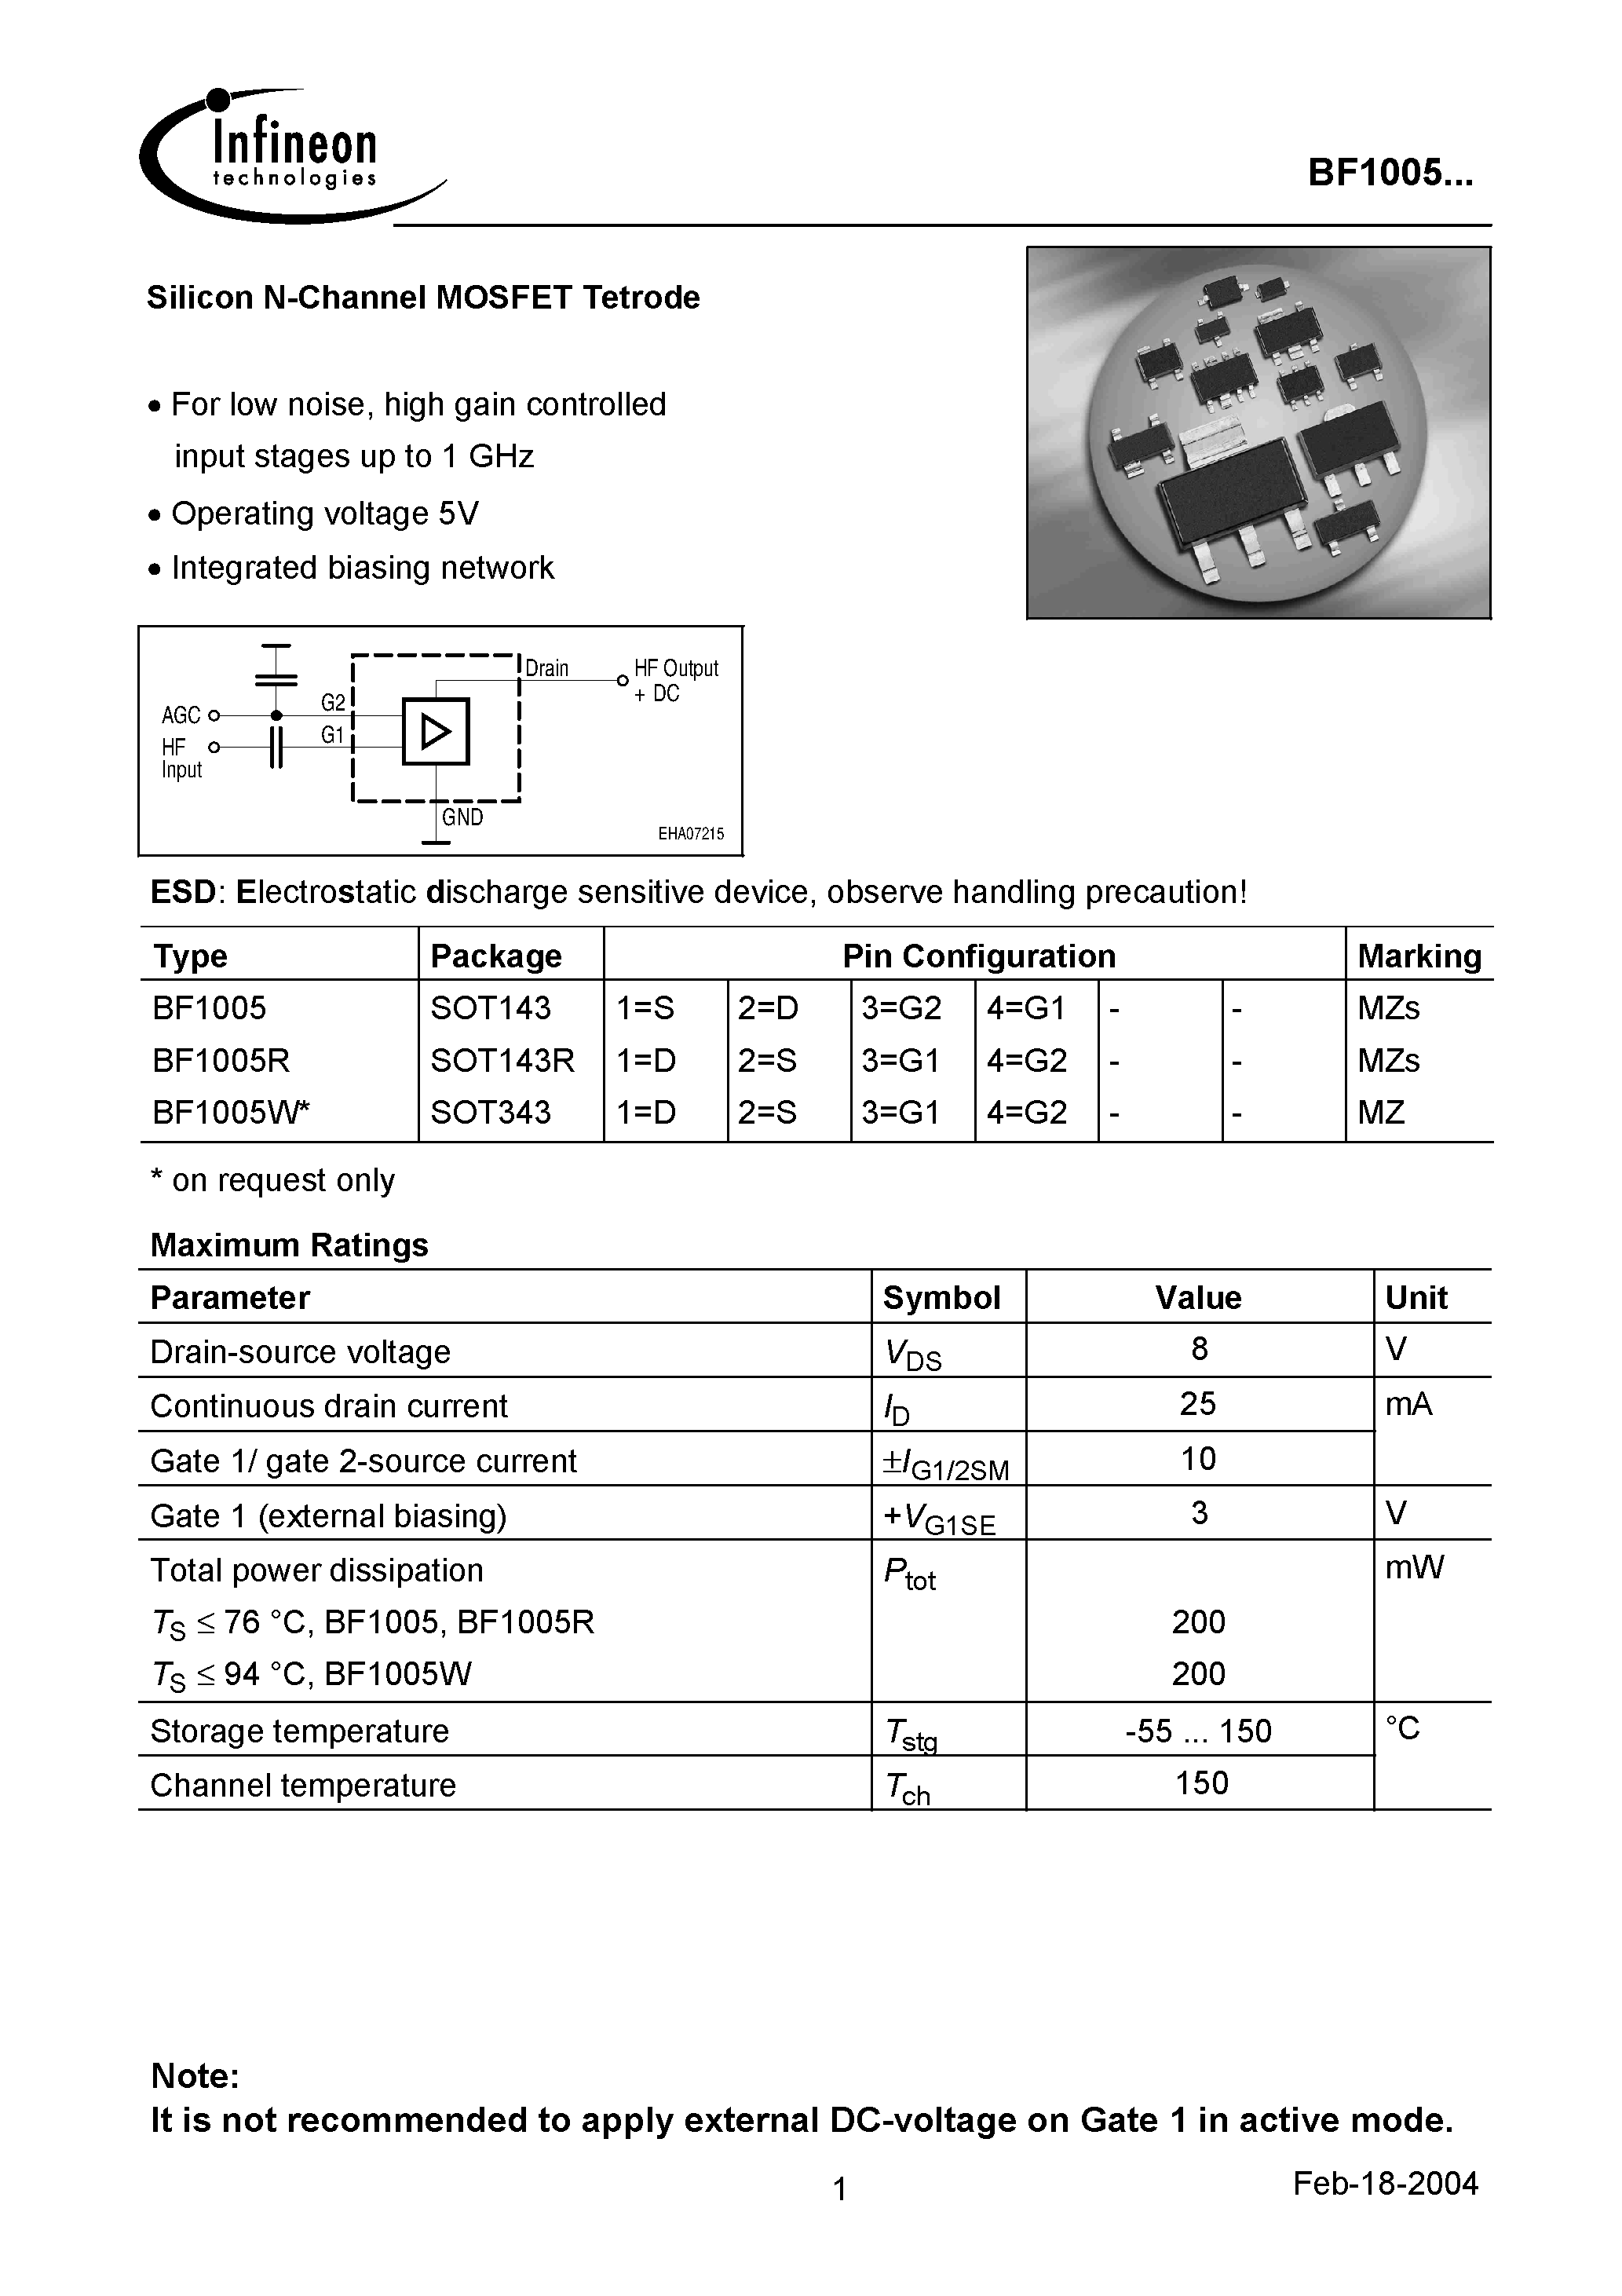 Даташит BF1005R - Silicon N-Channel MOSFET Tetrode страница 1